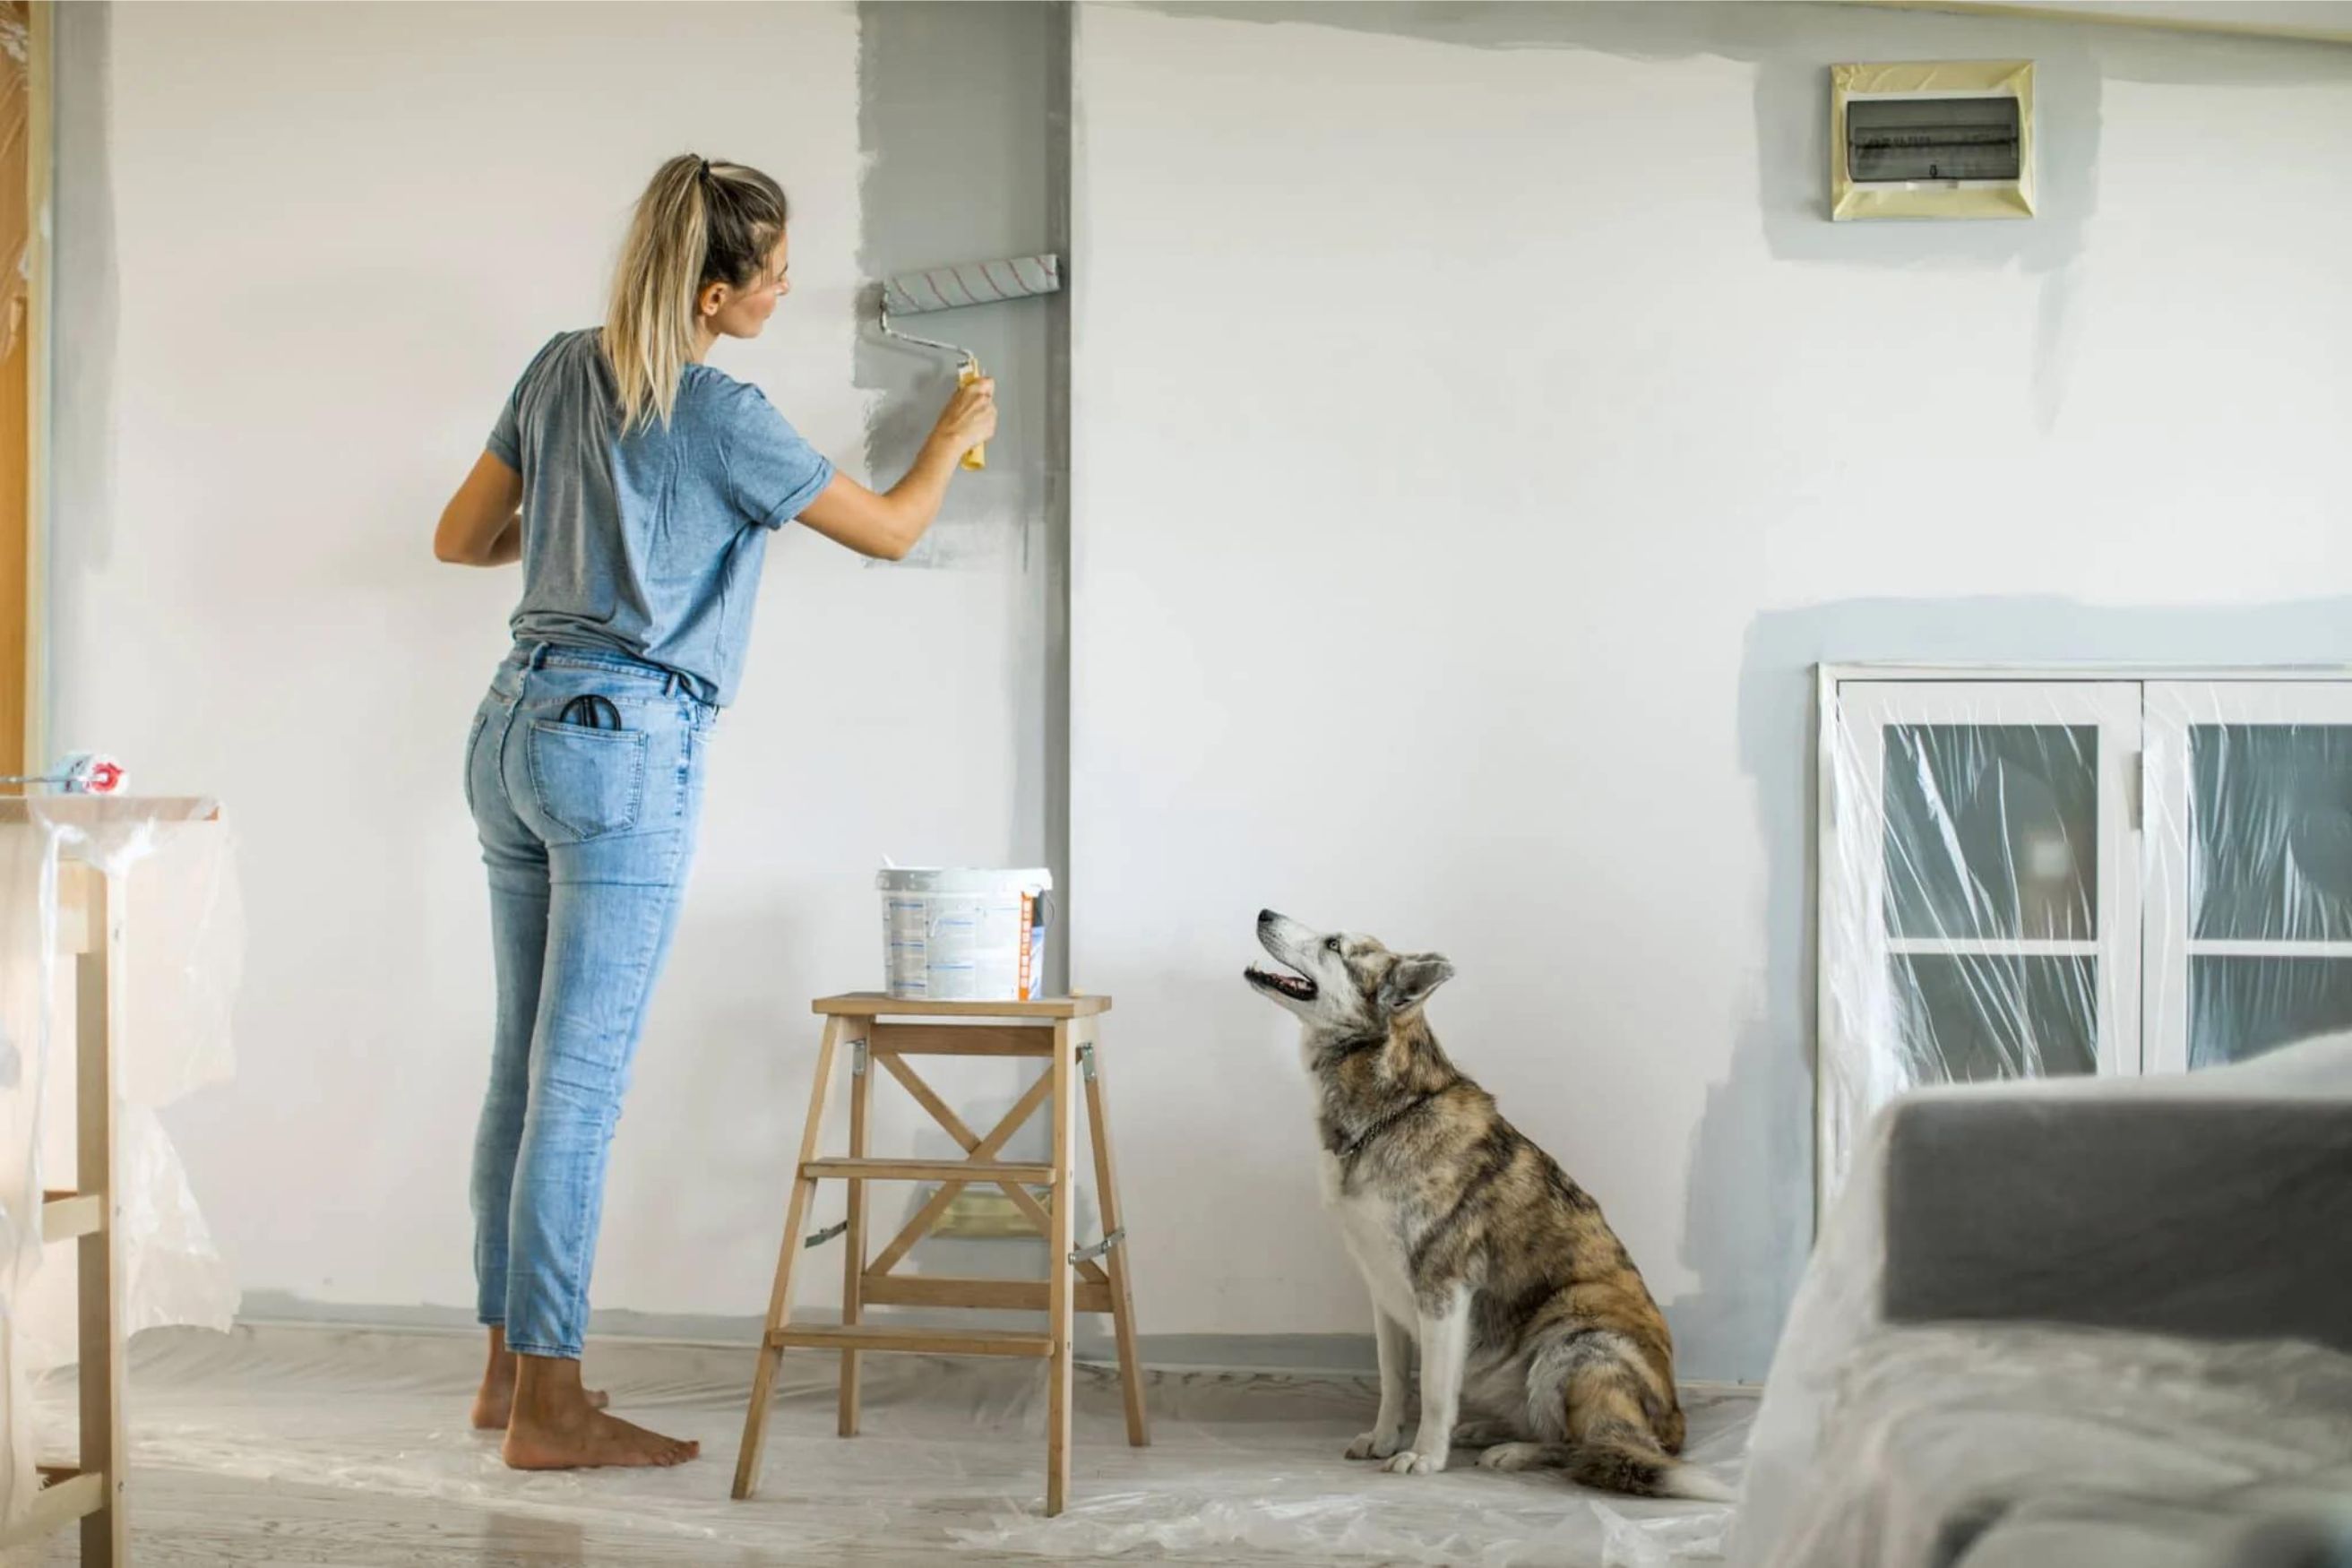 What Is The Going Rate For Painting Interior Walls